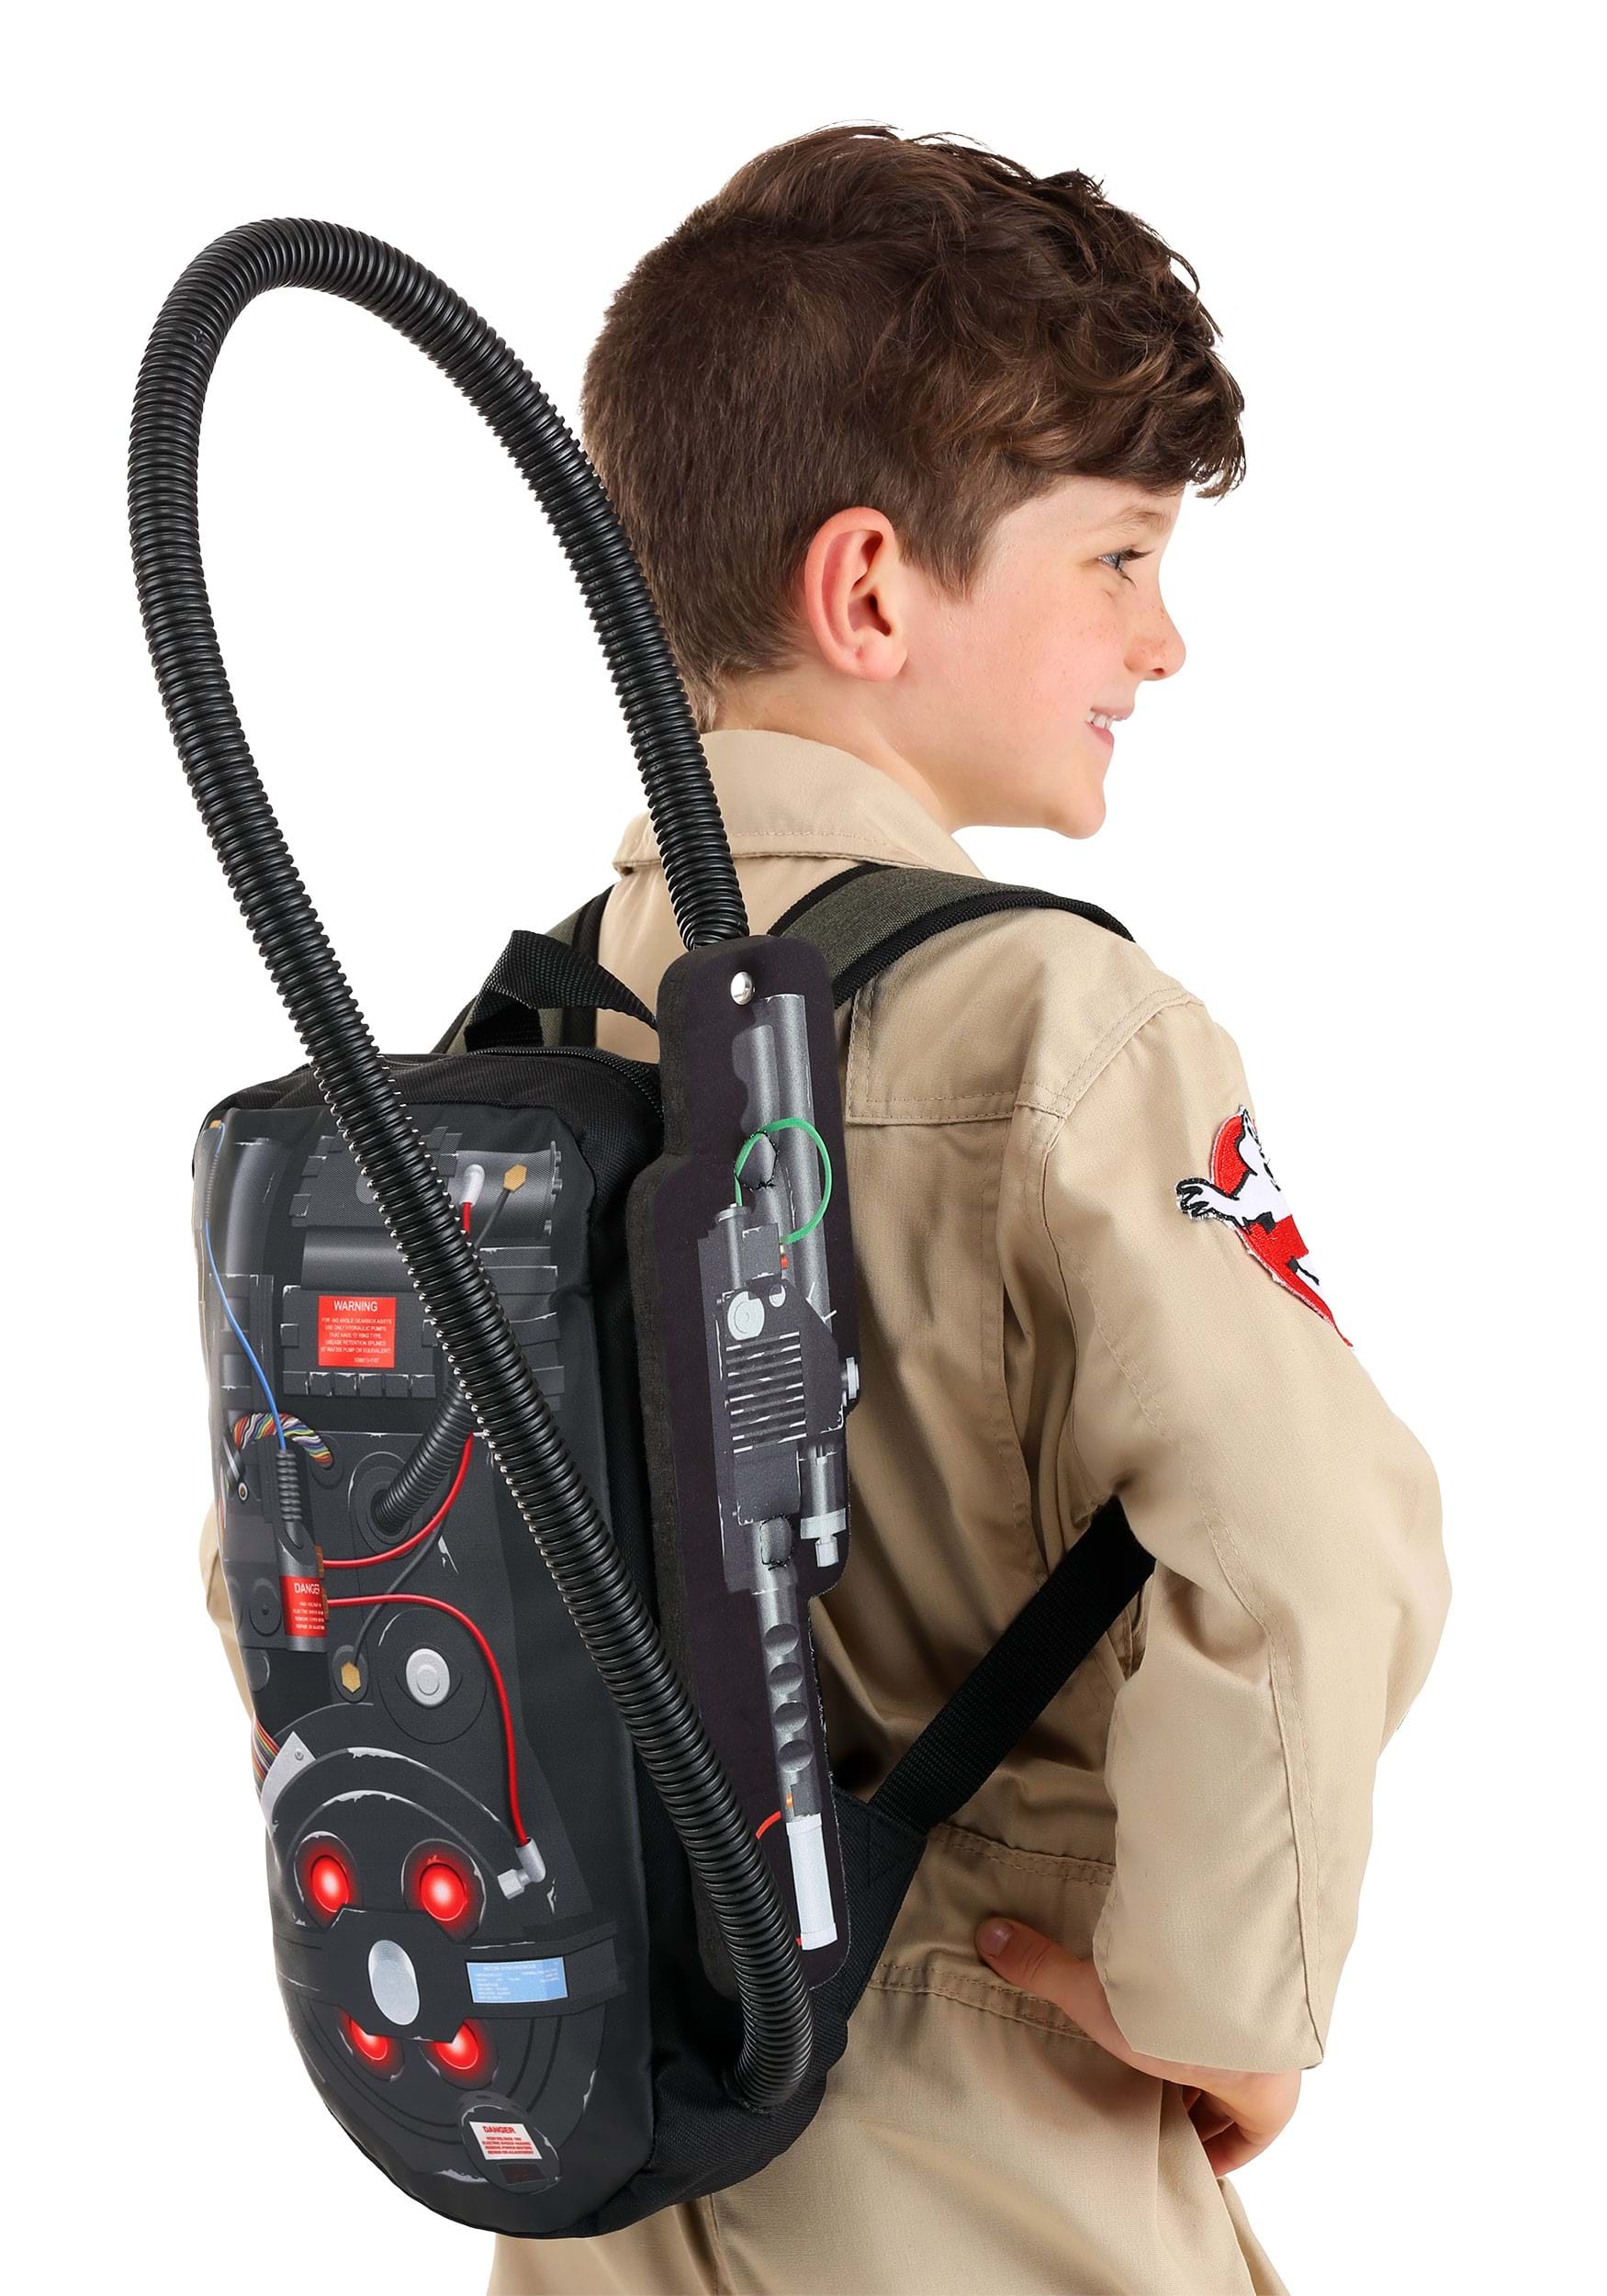 Ghostbuster Proton Pack For Toddlers